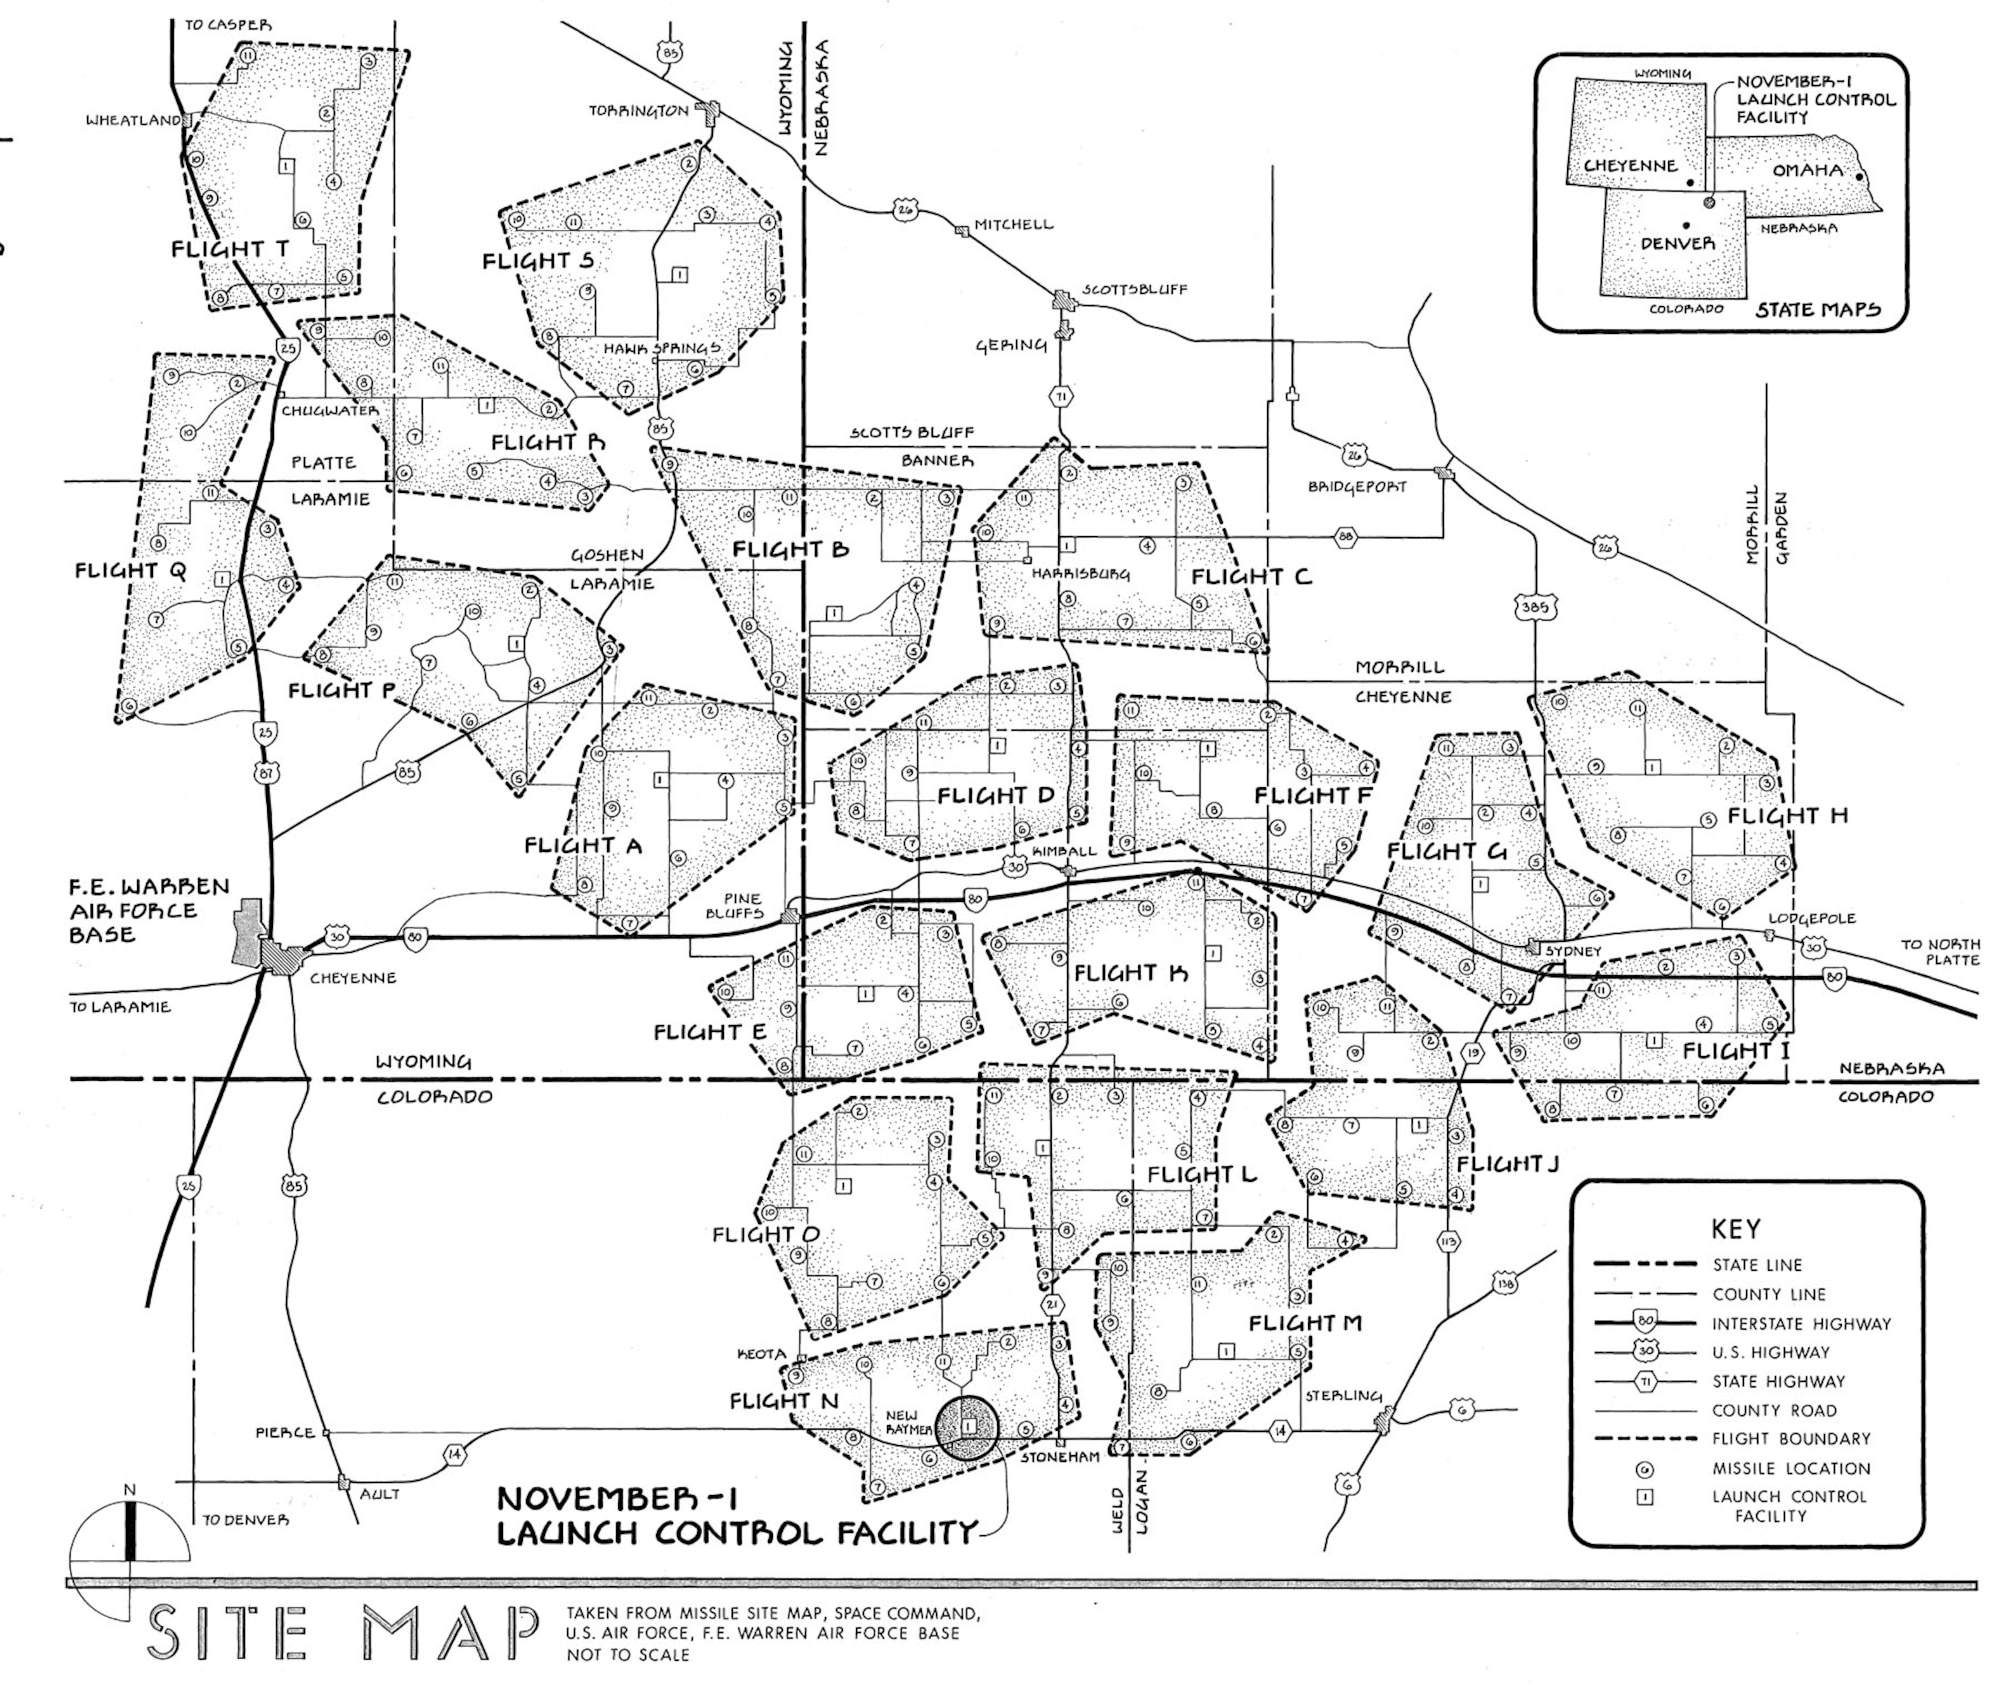 ICBM bases cover thousands of acres because missiles must be widely dispersed to avoid destruction in an enemy attack. This map of missile fields around F.E. Warren AFB, Wyo., shows locations of flights containing 10 missiles each. A single launch control facility served all the missiles in a flight. (Adapted from Historic American Engineering Record, National Park Service, Clayton B. Fraser, 1997.)